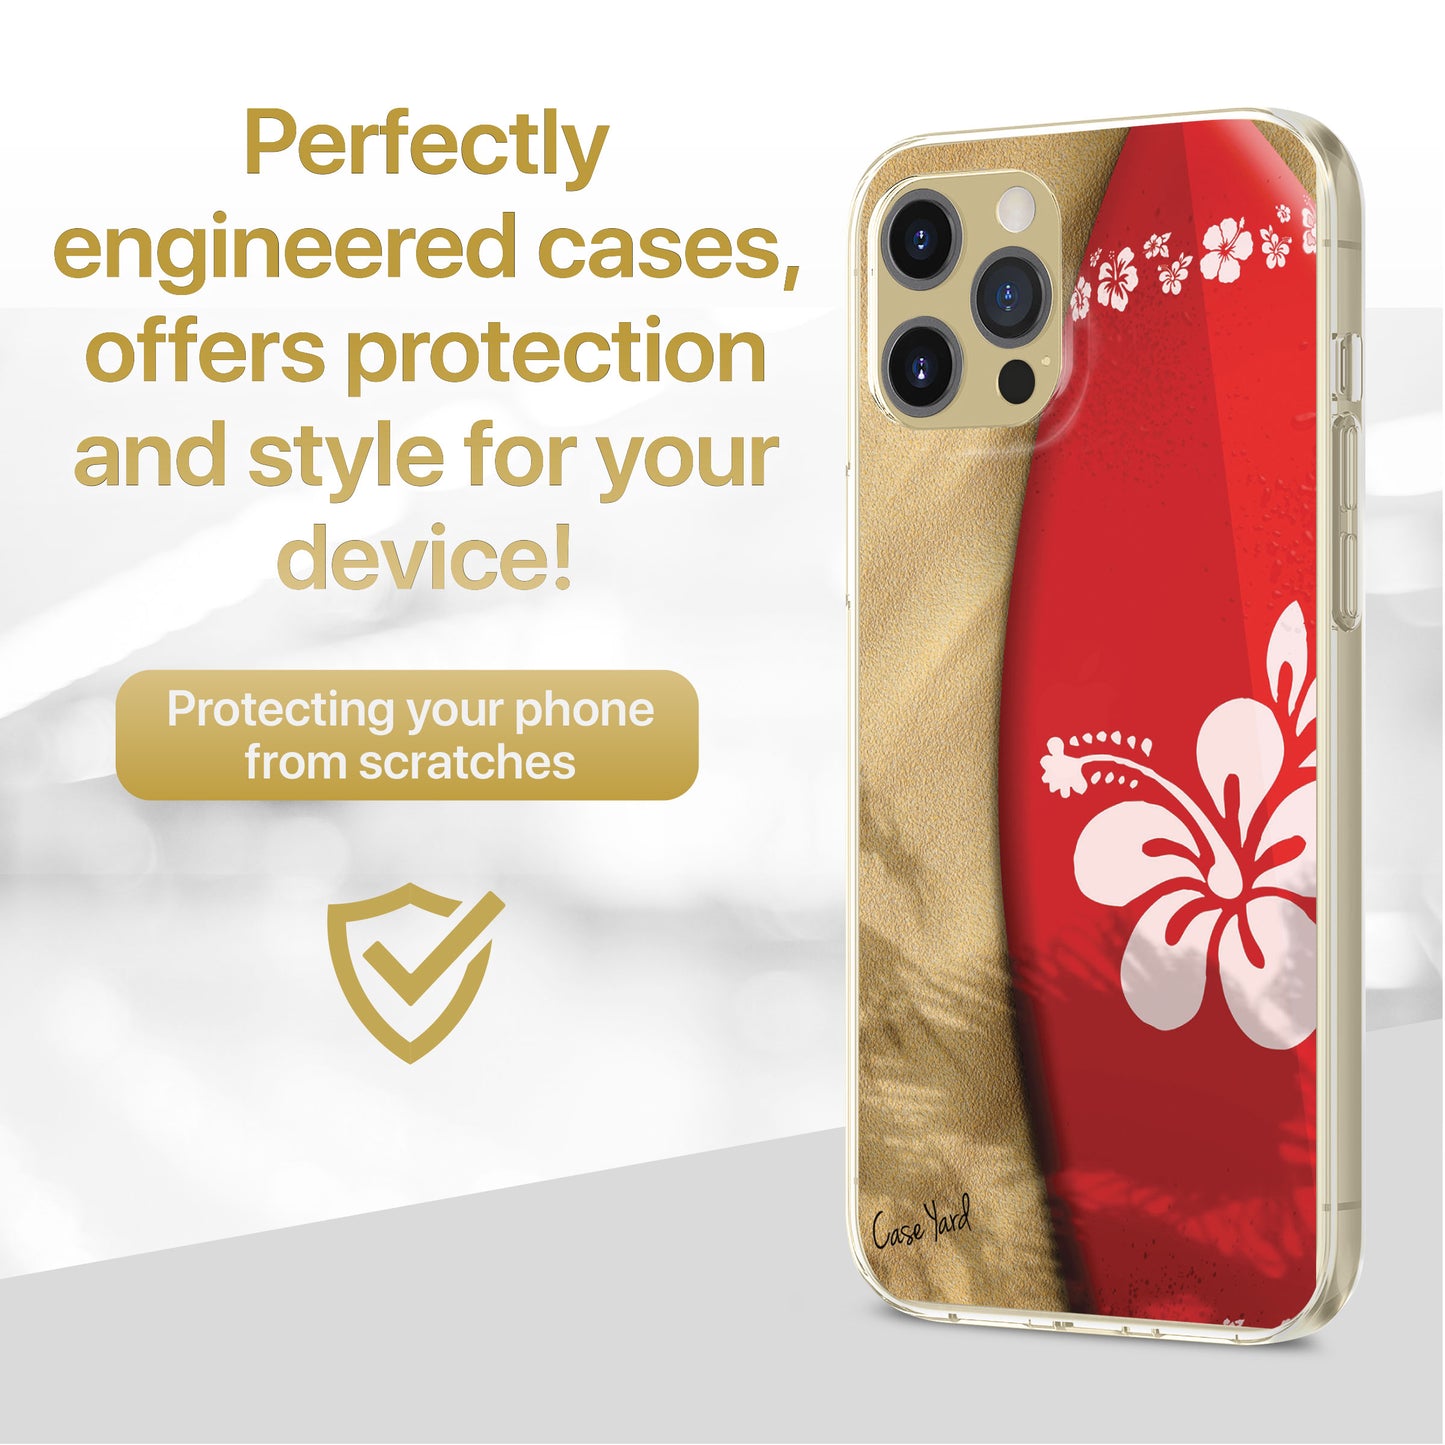 TPU Case Clear case with (Surf Board) Design for iPhone & Samsung Phones